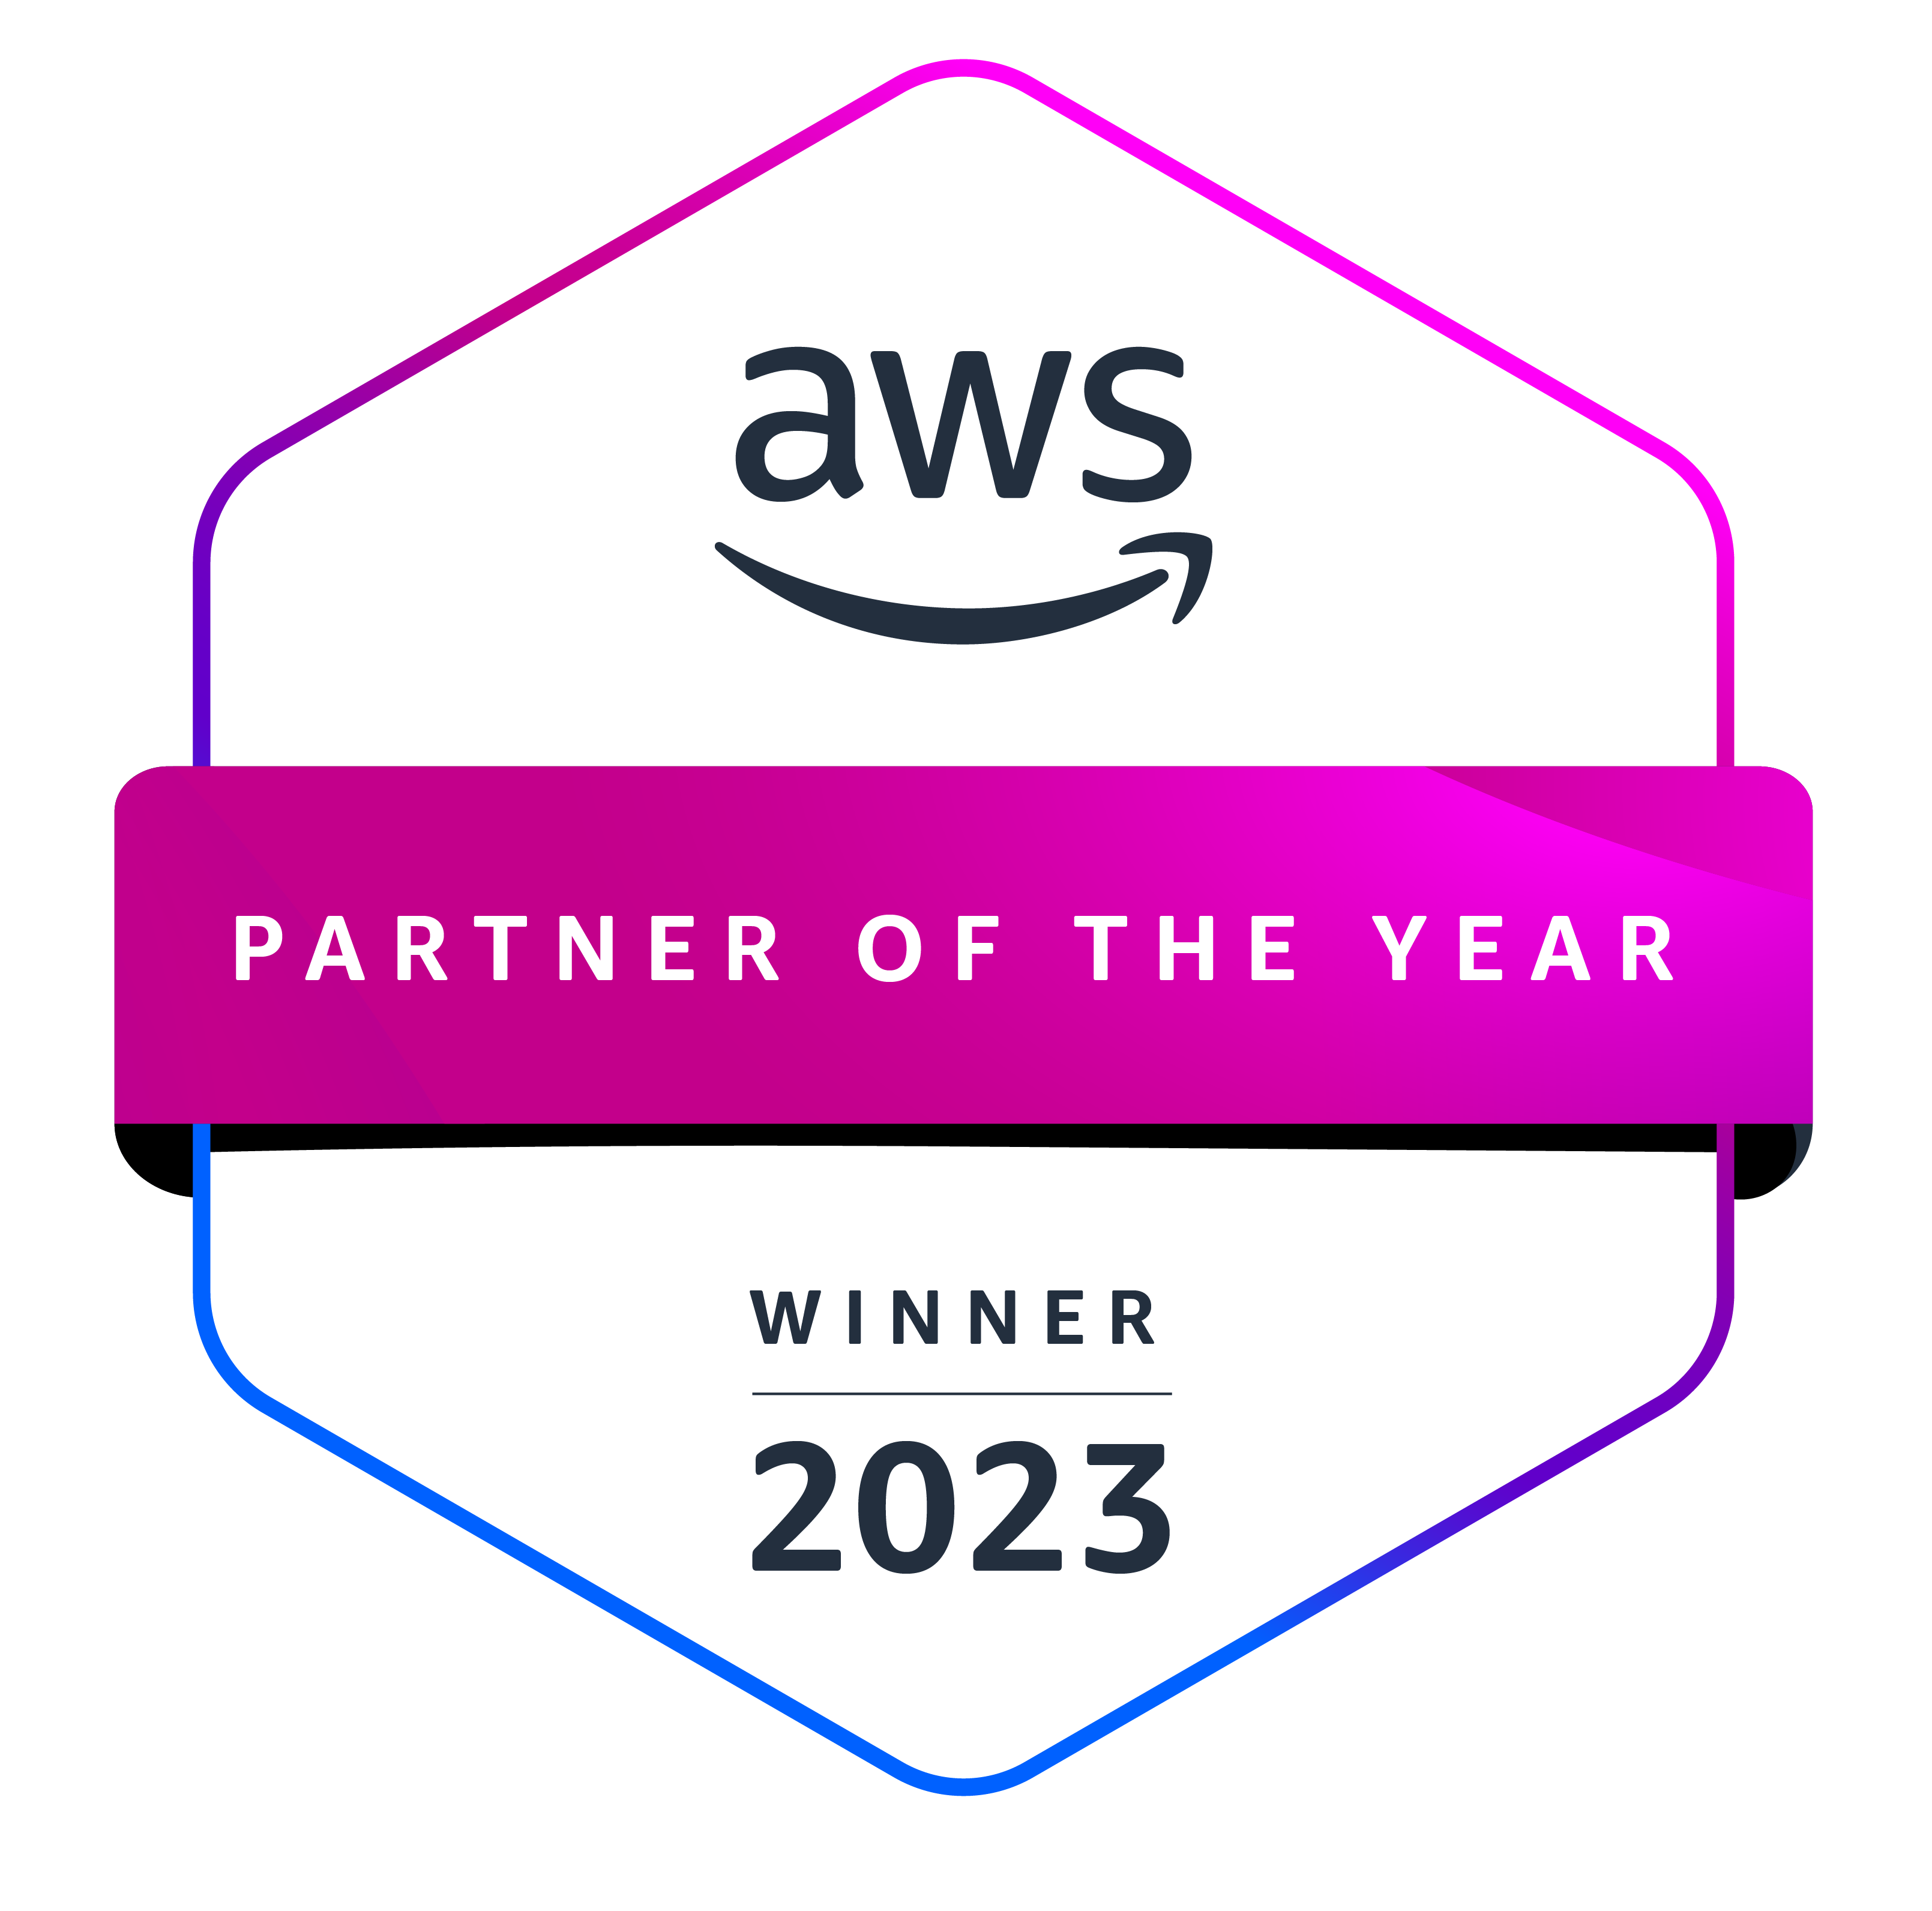 AWS Partner of the year 2023